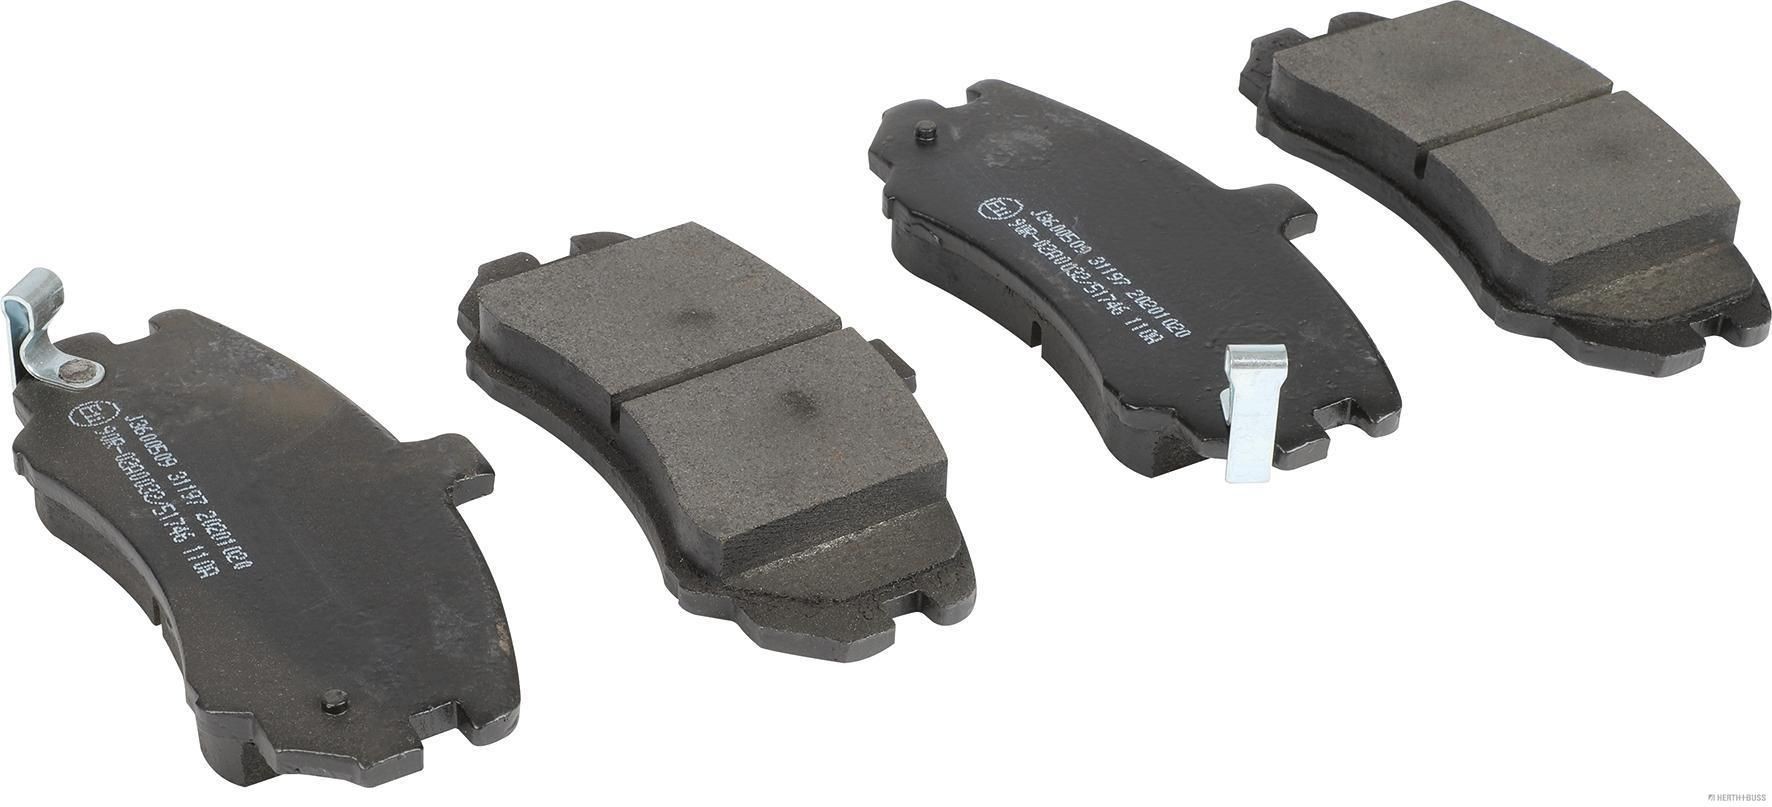 HERTH+BUSS JAKOPARTS with acoustic wear warning Height 1: 63,2mm, Height 2: 63,2mm, Width 1: 131,5mm, Width 2 [mm]: 131,5mm, Thickness 1: 16,5mm, Thickness 2: 16,5mm Brake pads J3600509 buy